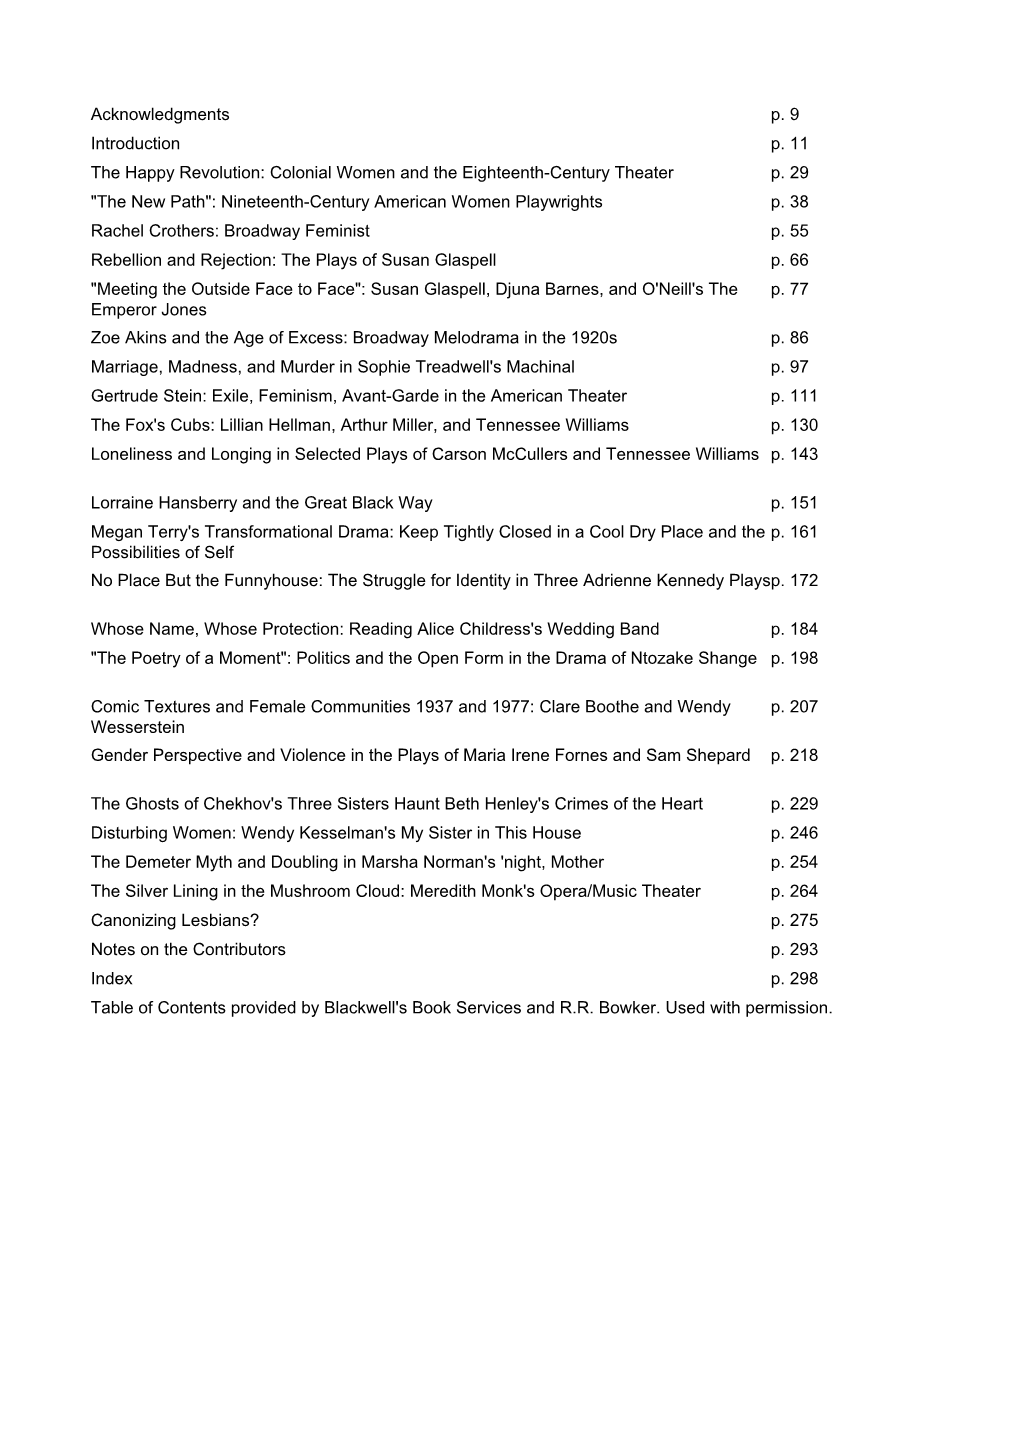 Table of Contents Provided by Blackwell's Book Services and R.R